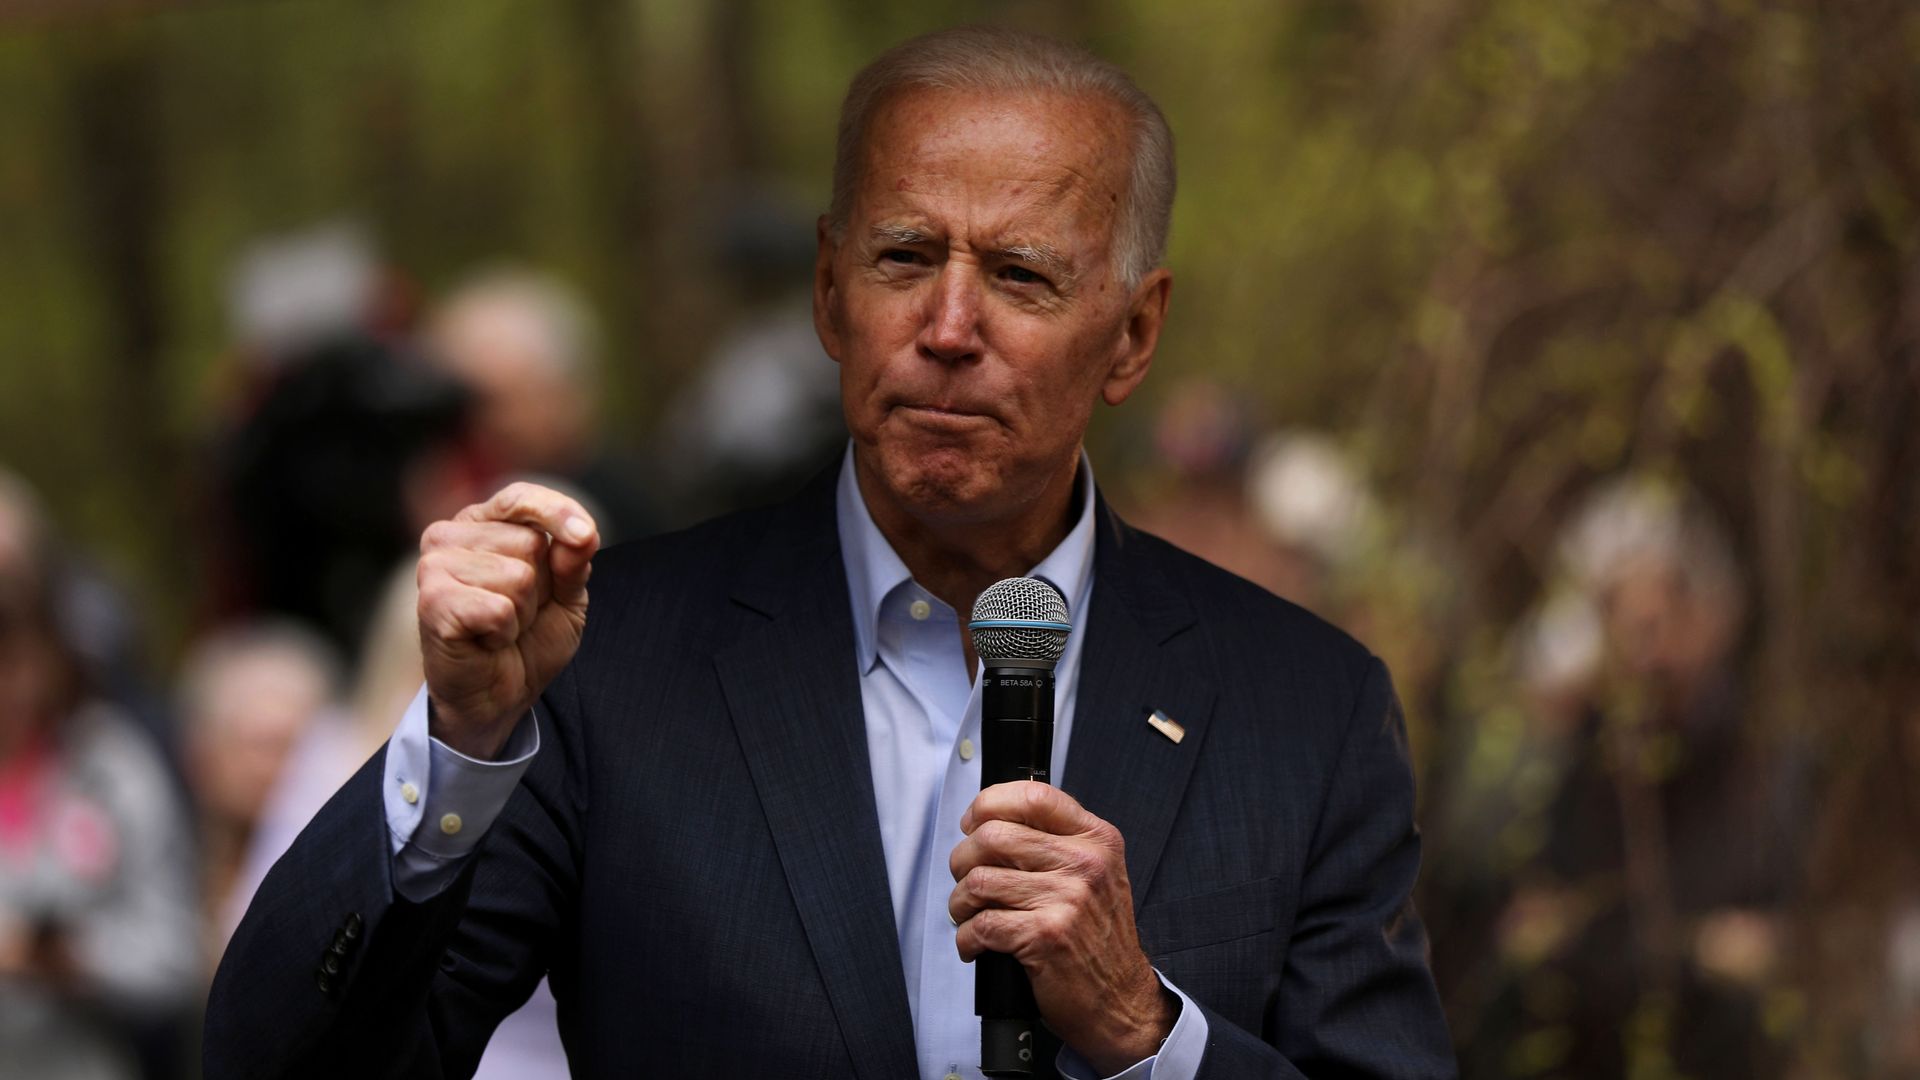 In this image, Biden speaks into a microphone while standing outside in a forested area.